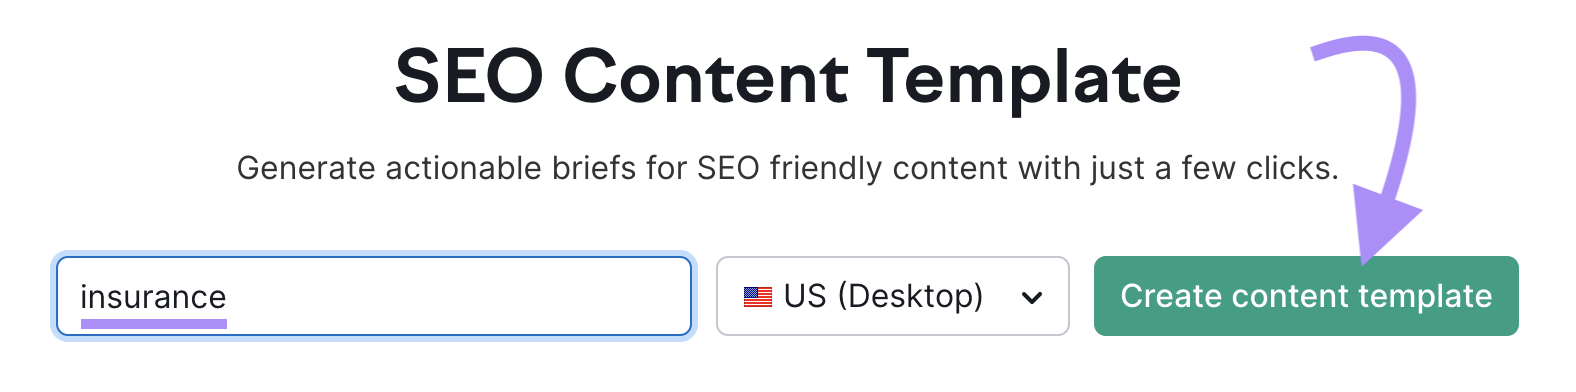 "insurance" entered into the SEO Content Template search bar